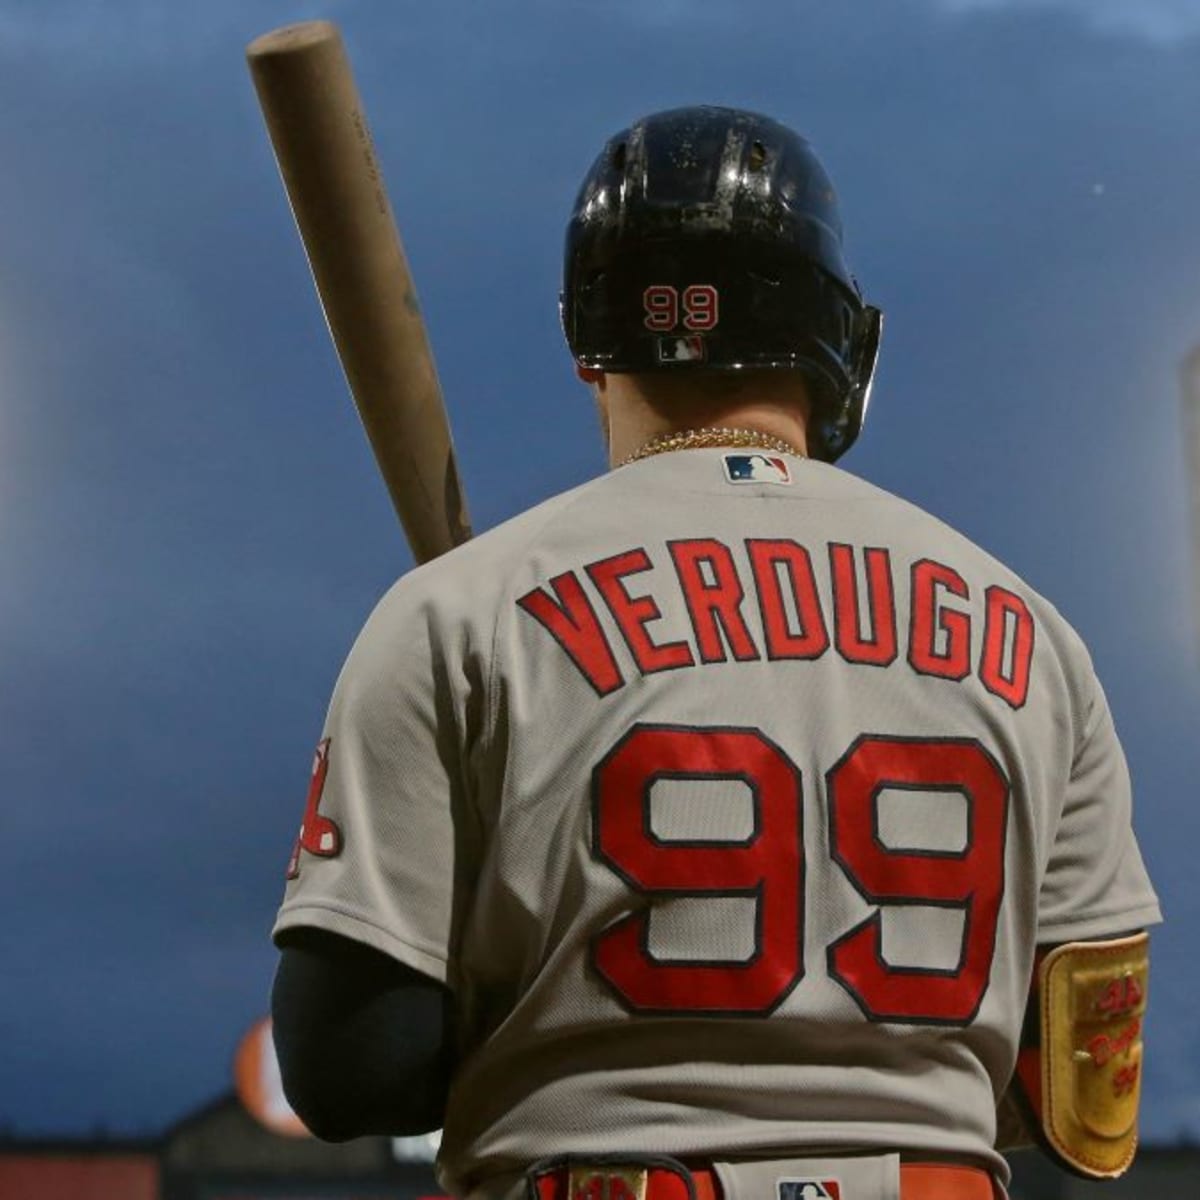 Alex Verdugo: I want to be a two-way player